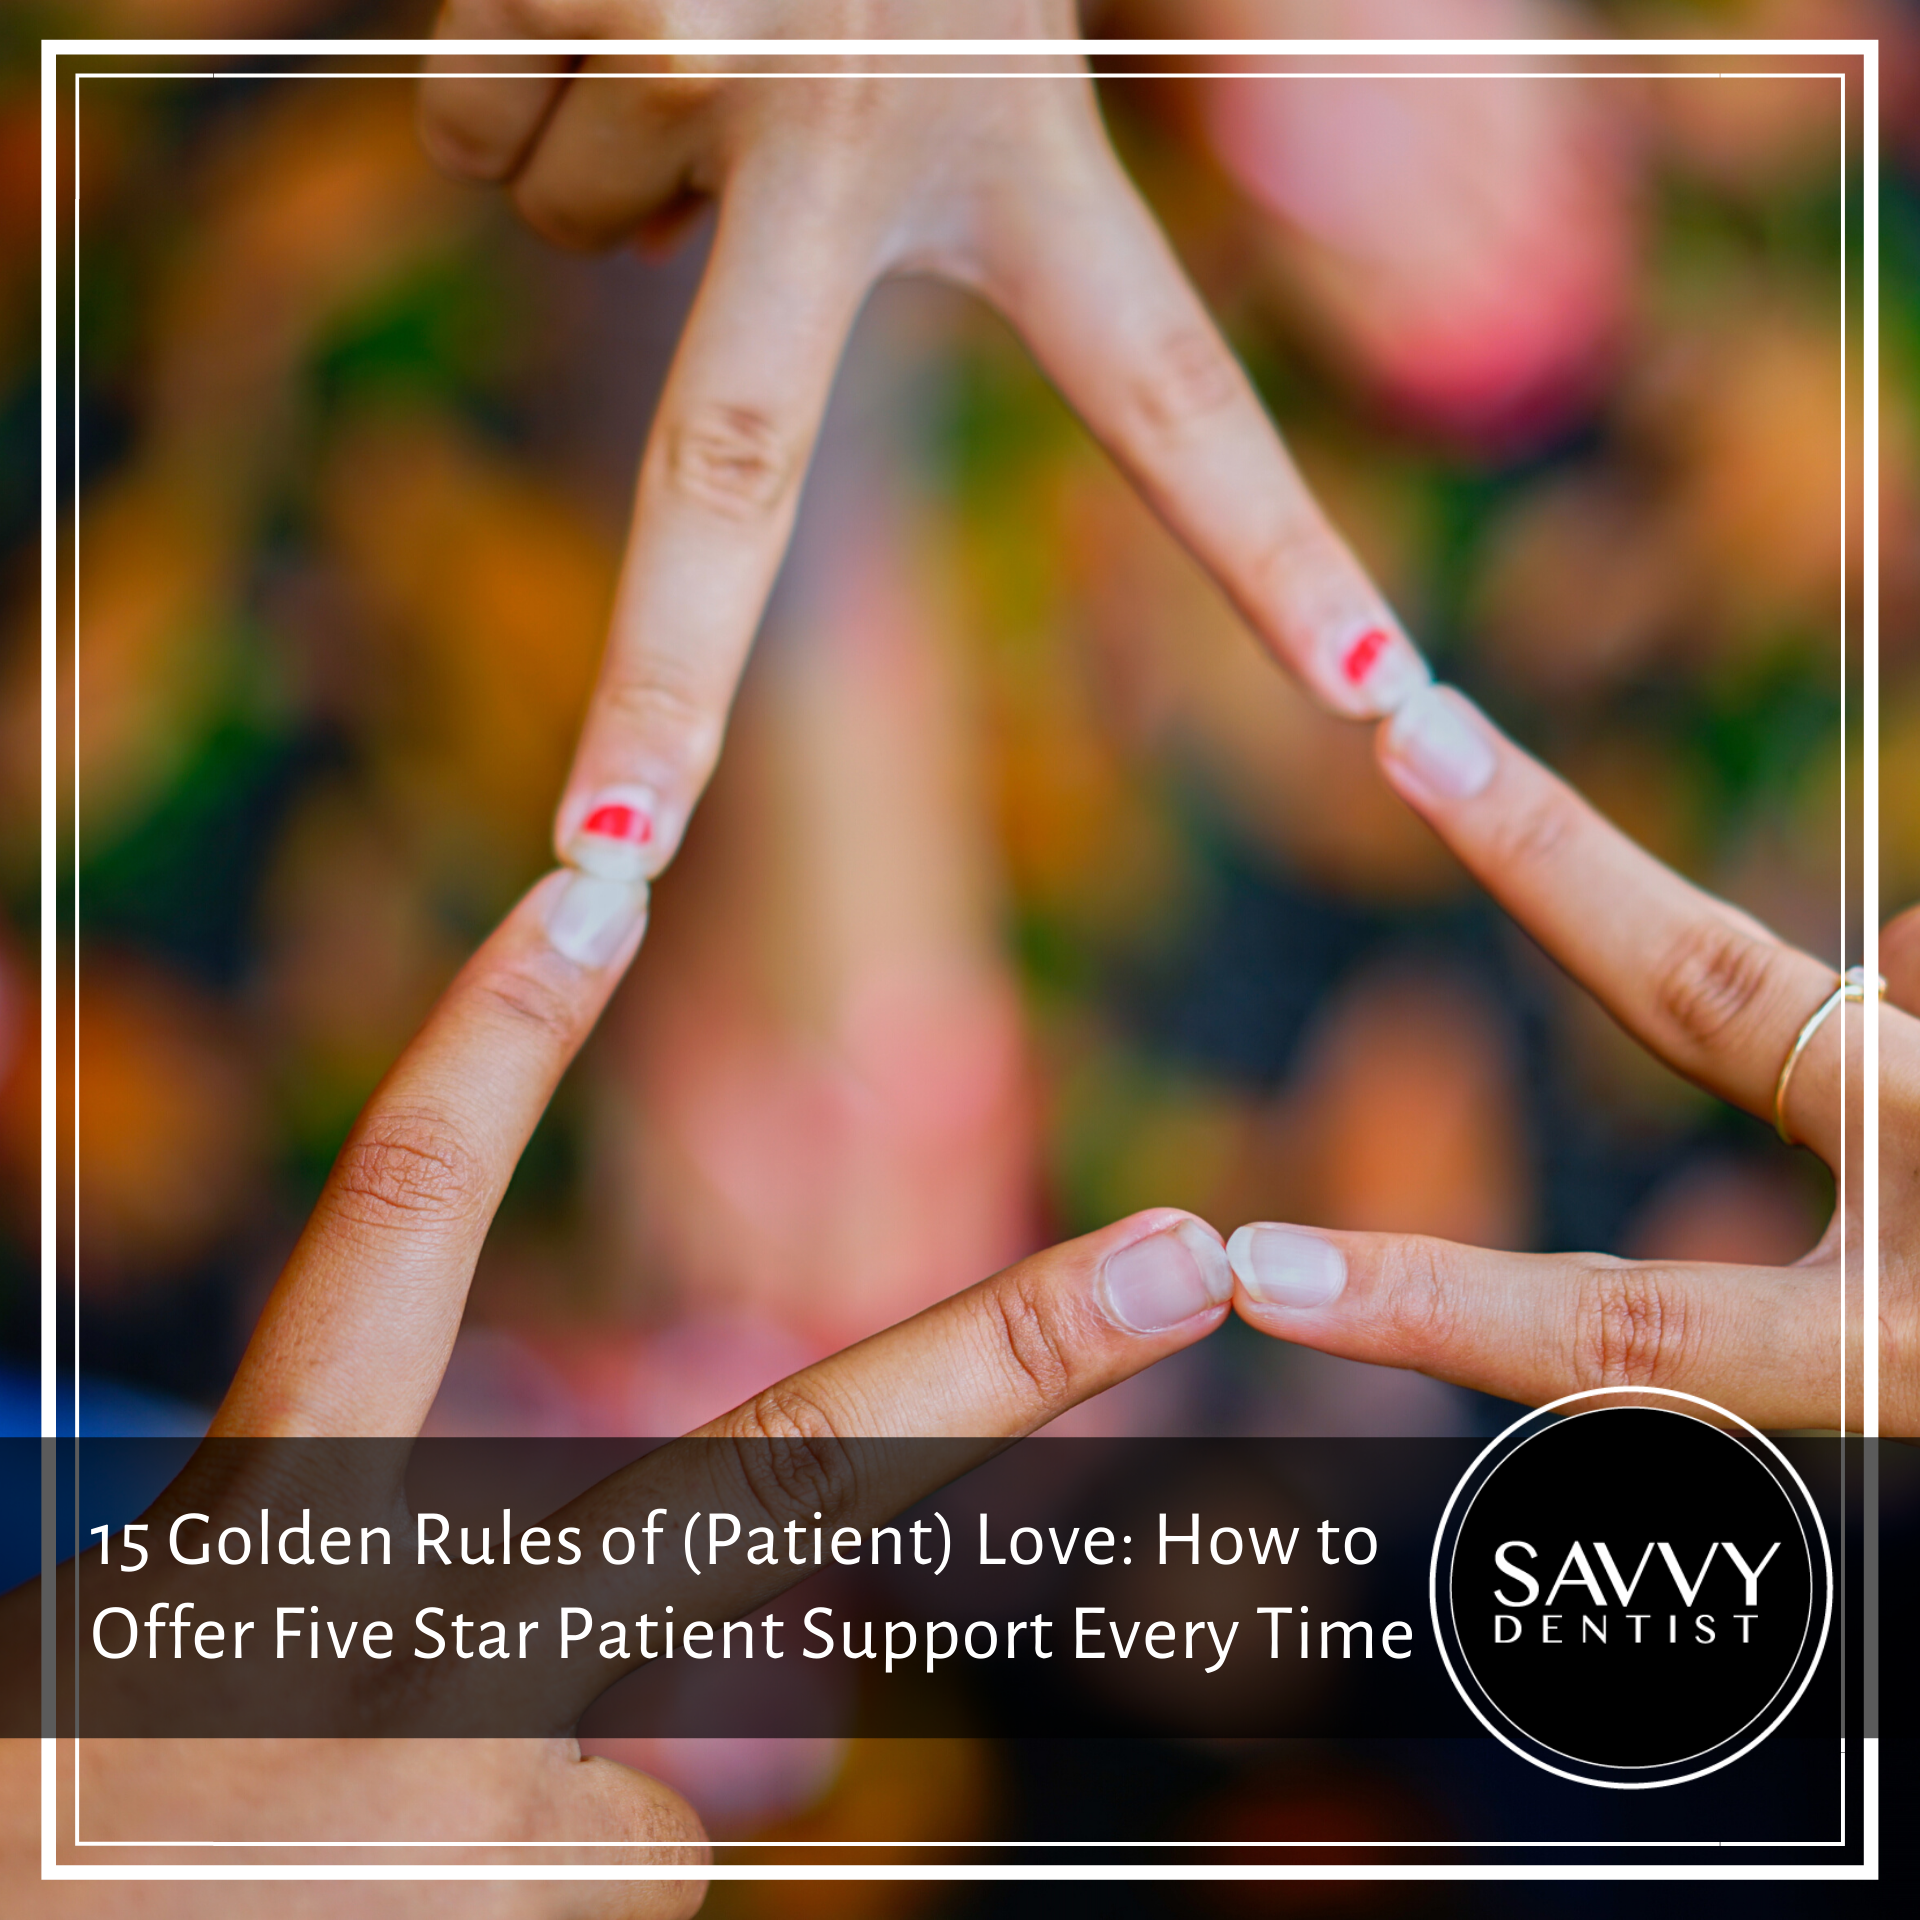 15 Golden Rules of (Patient) Love: How to Offer Five Star Patient Support Every Time